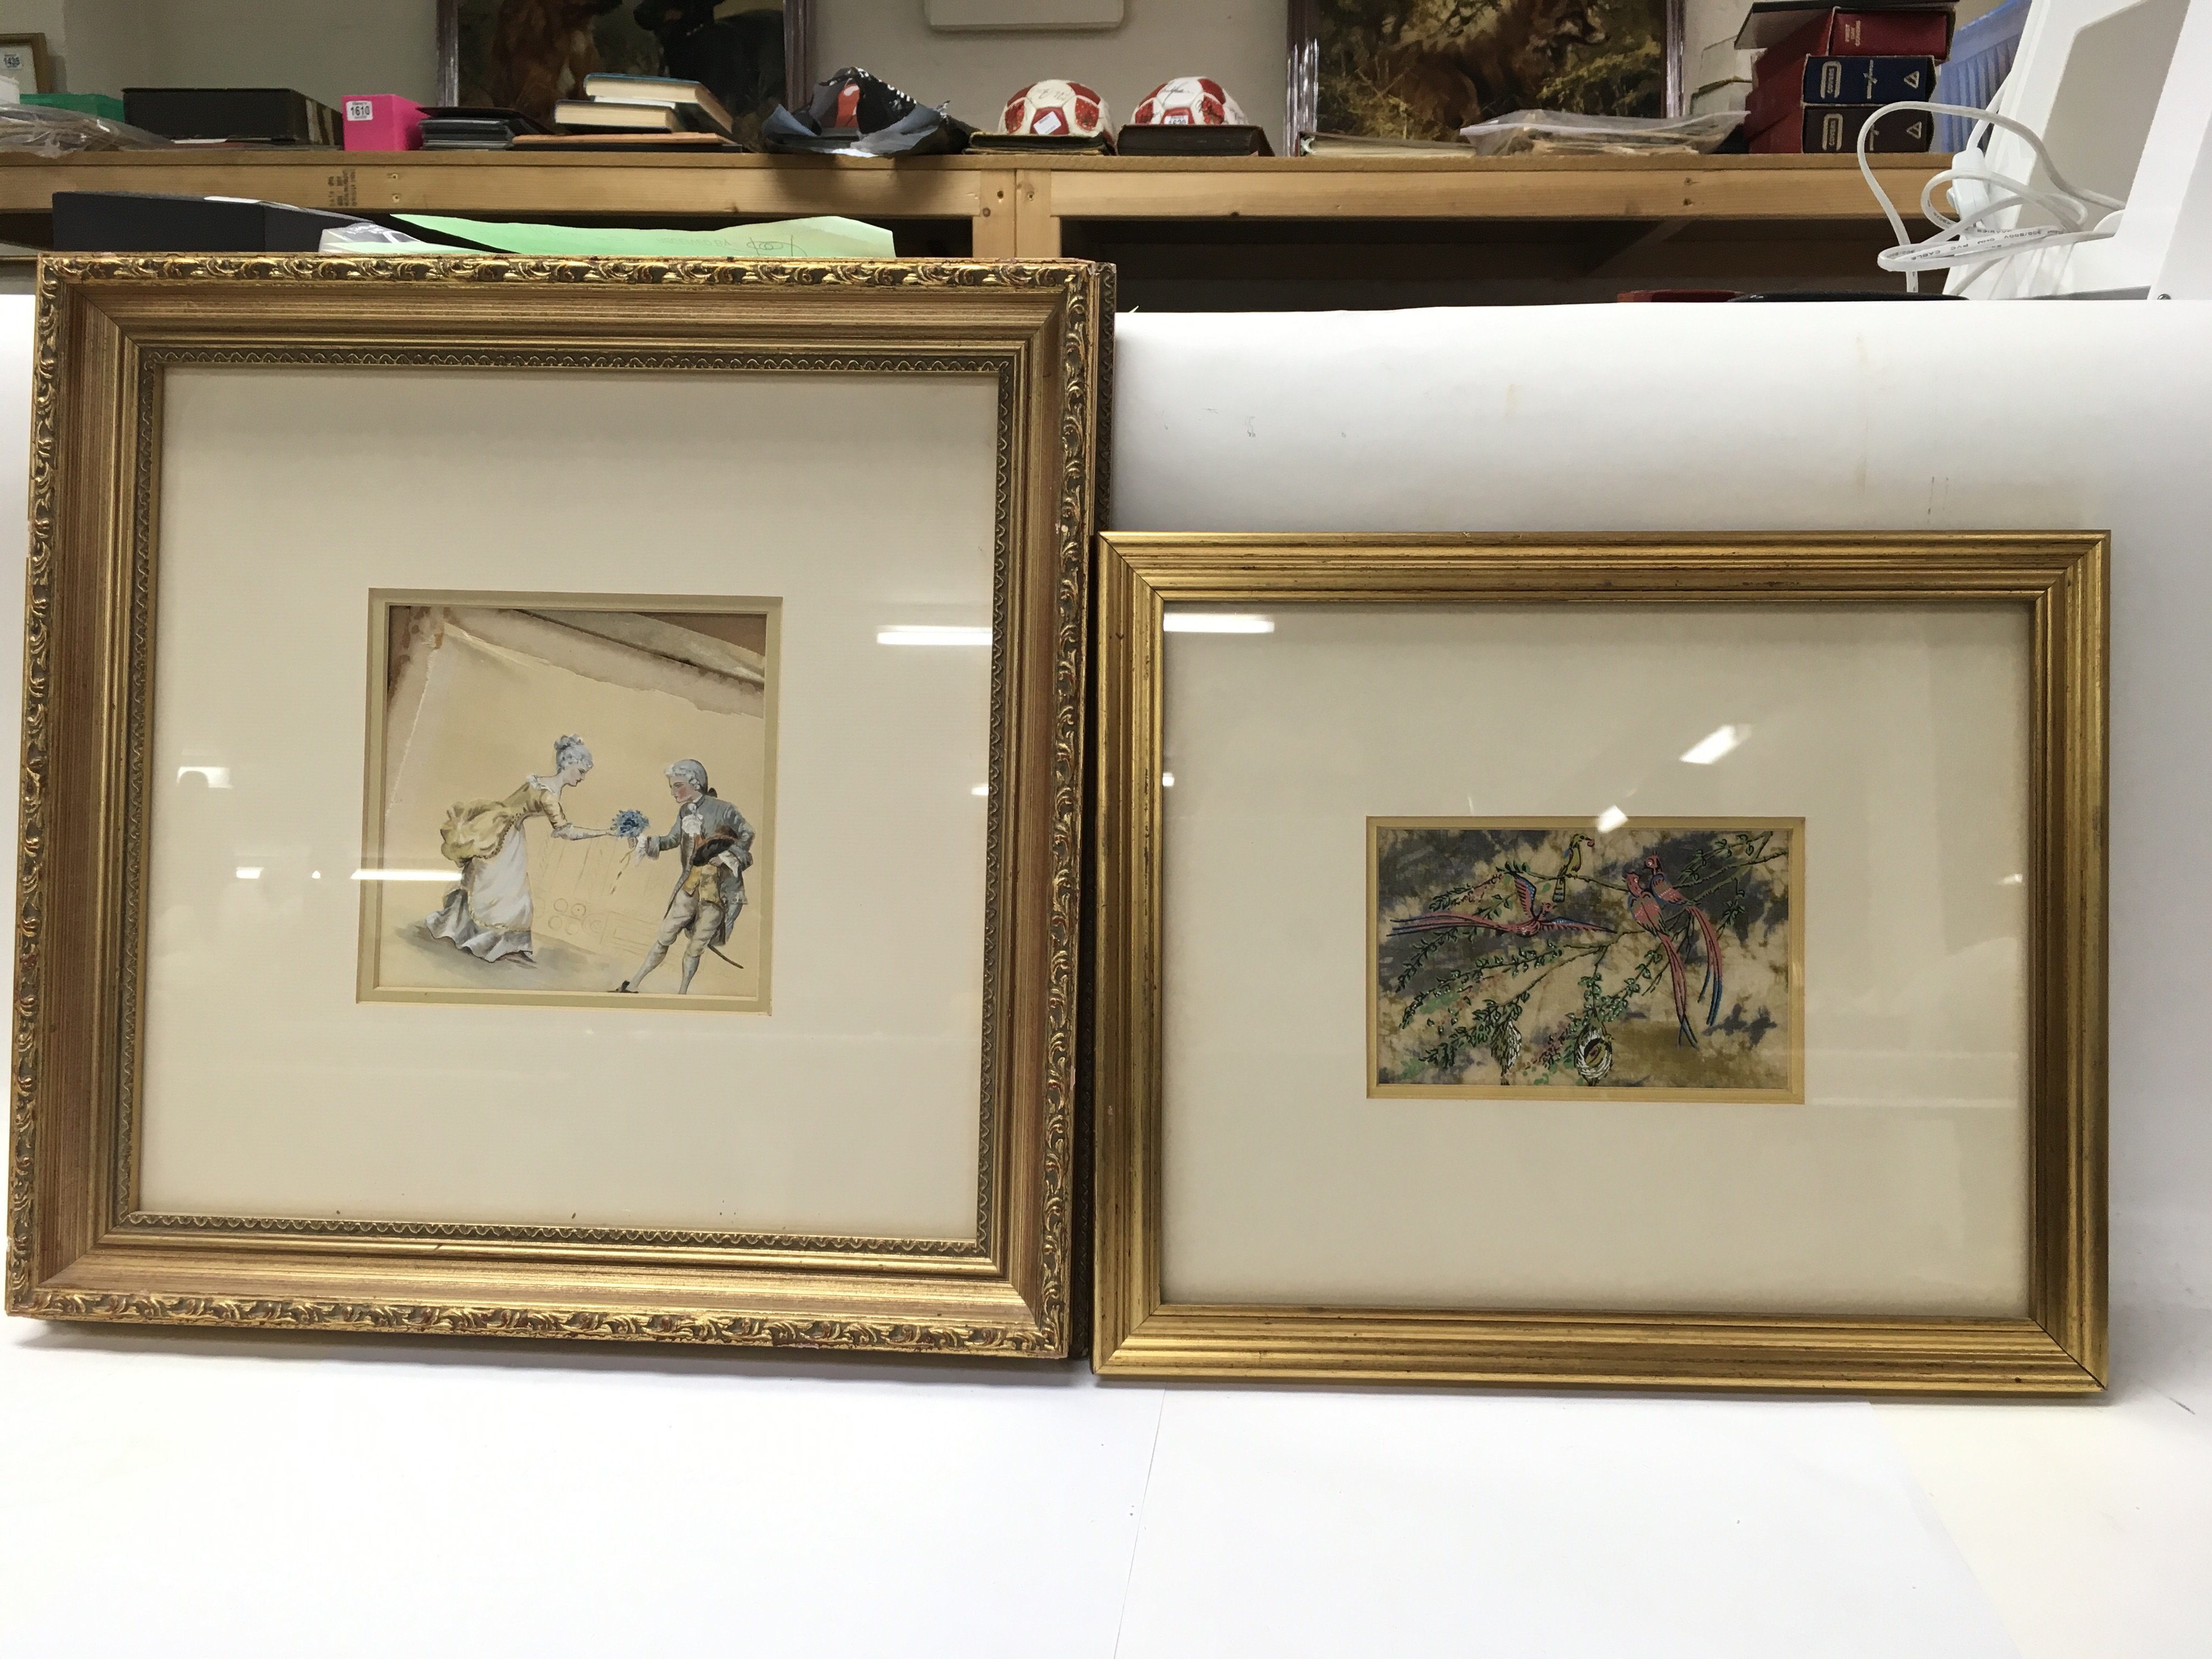 A collection of local interest original watercolours by Ian James along with others.